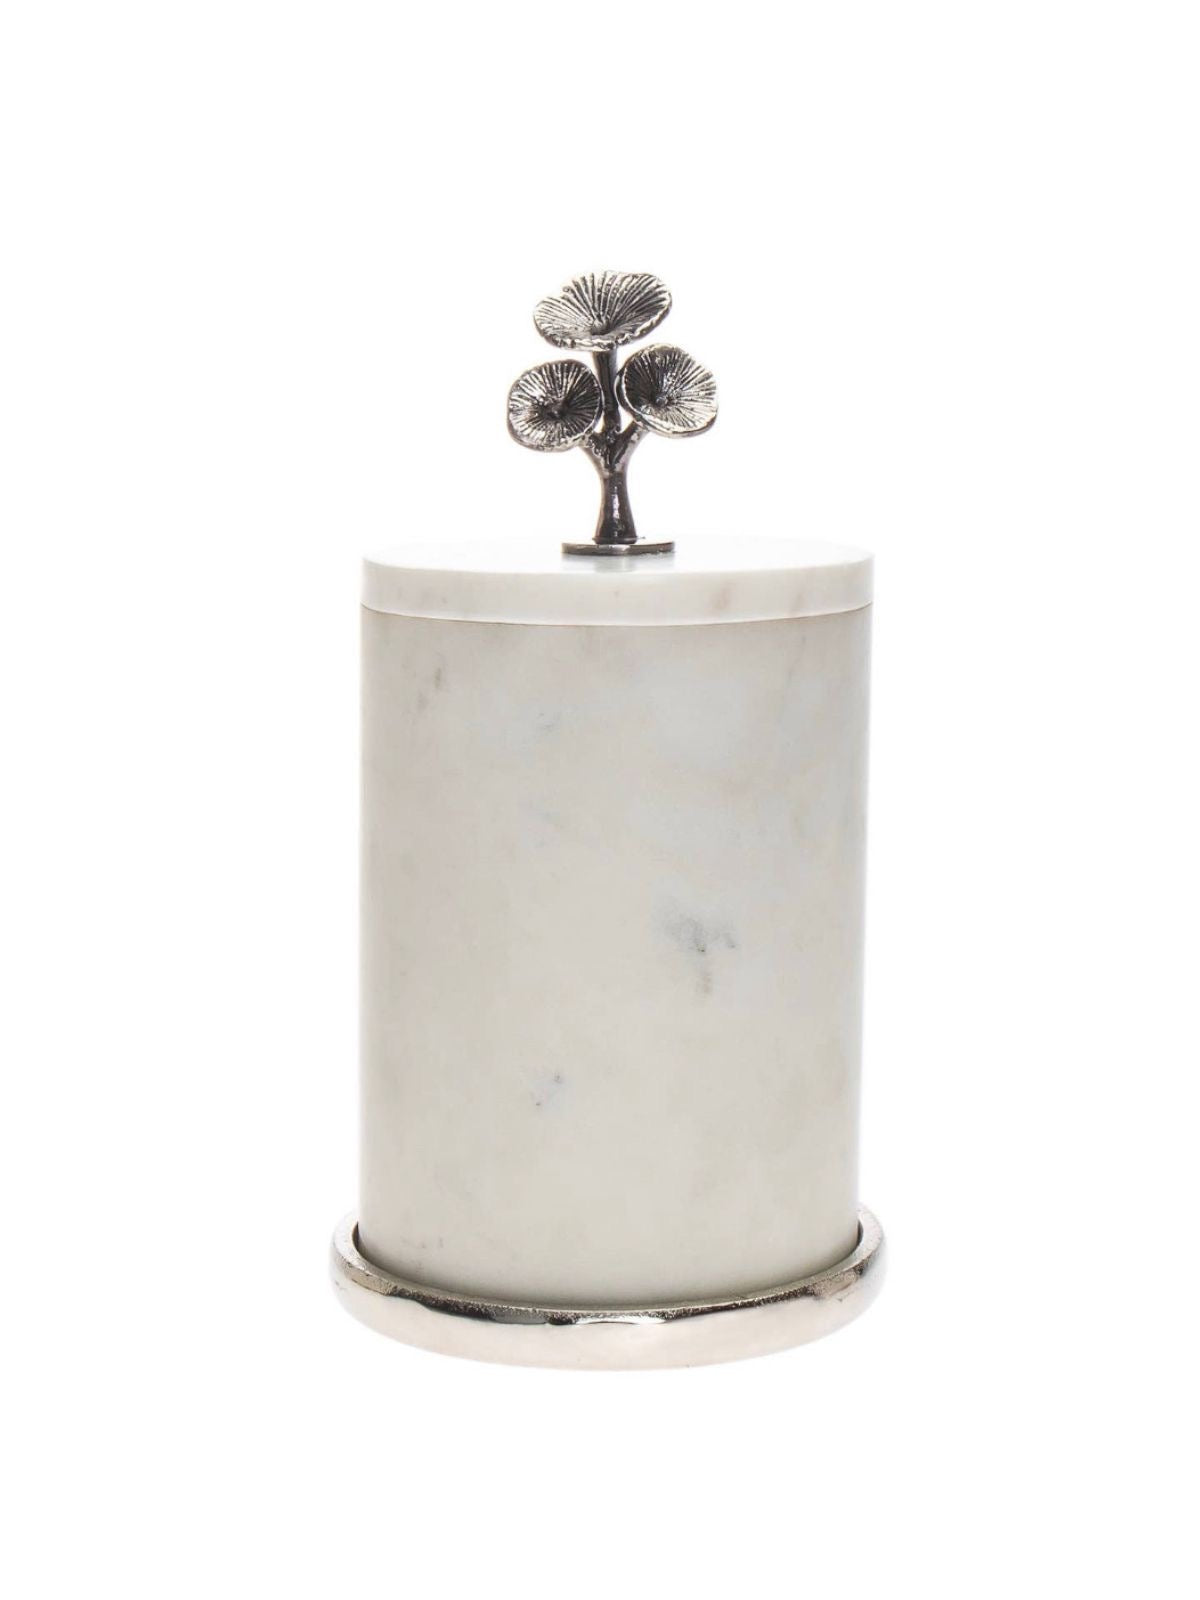 7.5H White Marble Luxury Kitchen Canisters with Silver Metal Floral Design on Lids - KYA Home Decor.